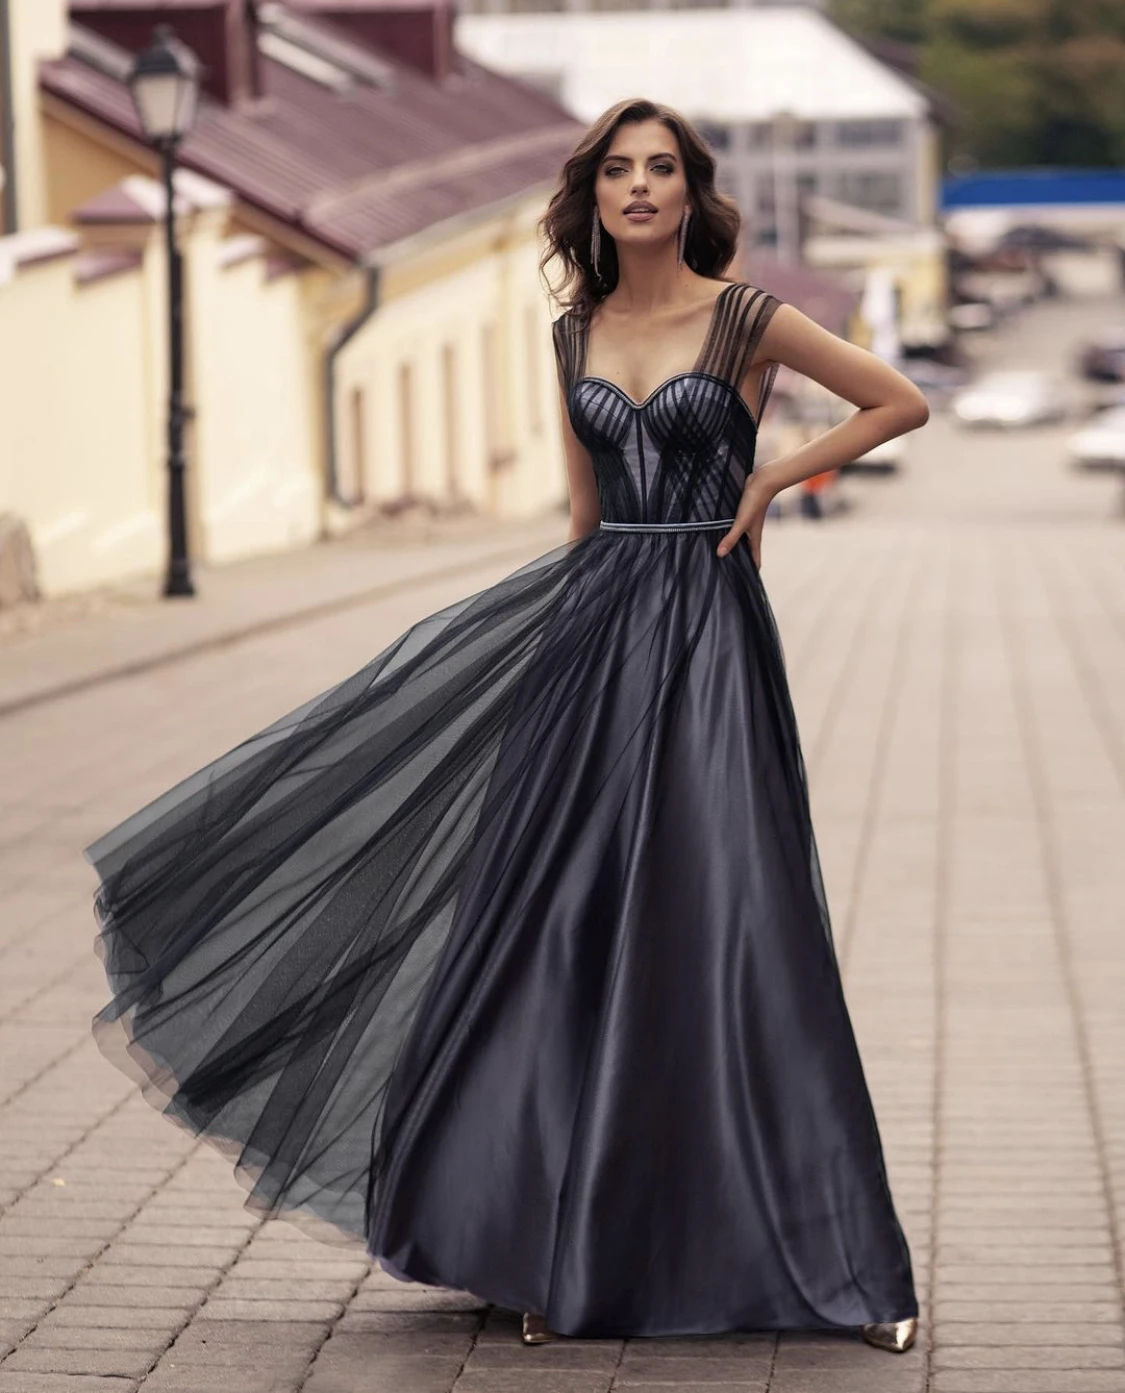 maternity evening dresses Tulle A-Line Evening Dresses 2021 Sweetheart Cap Sleeve Sashes Satin Floor Length Formal Party Prom Gown Open Back Custom Made black evening gowns